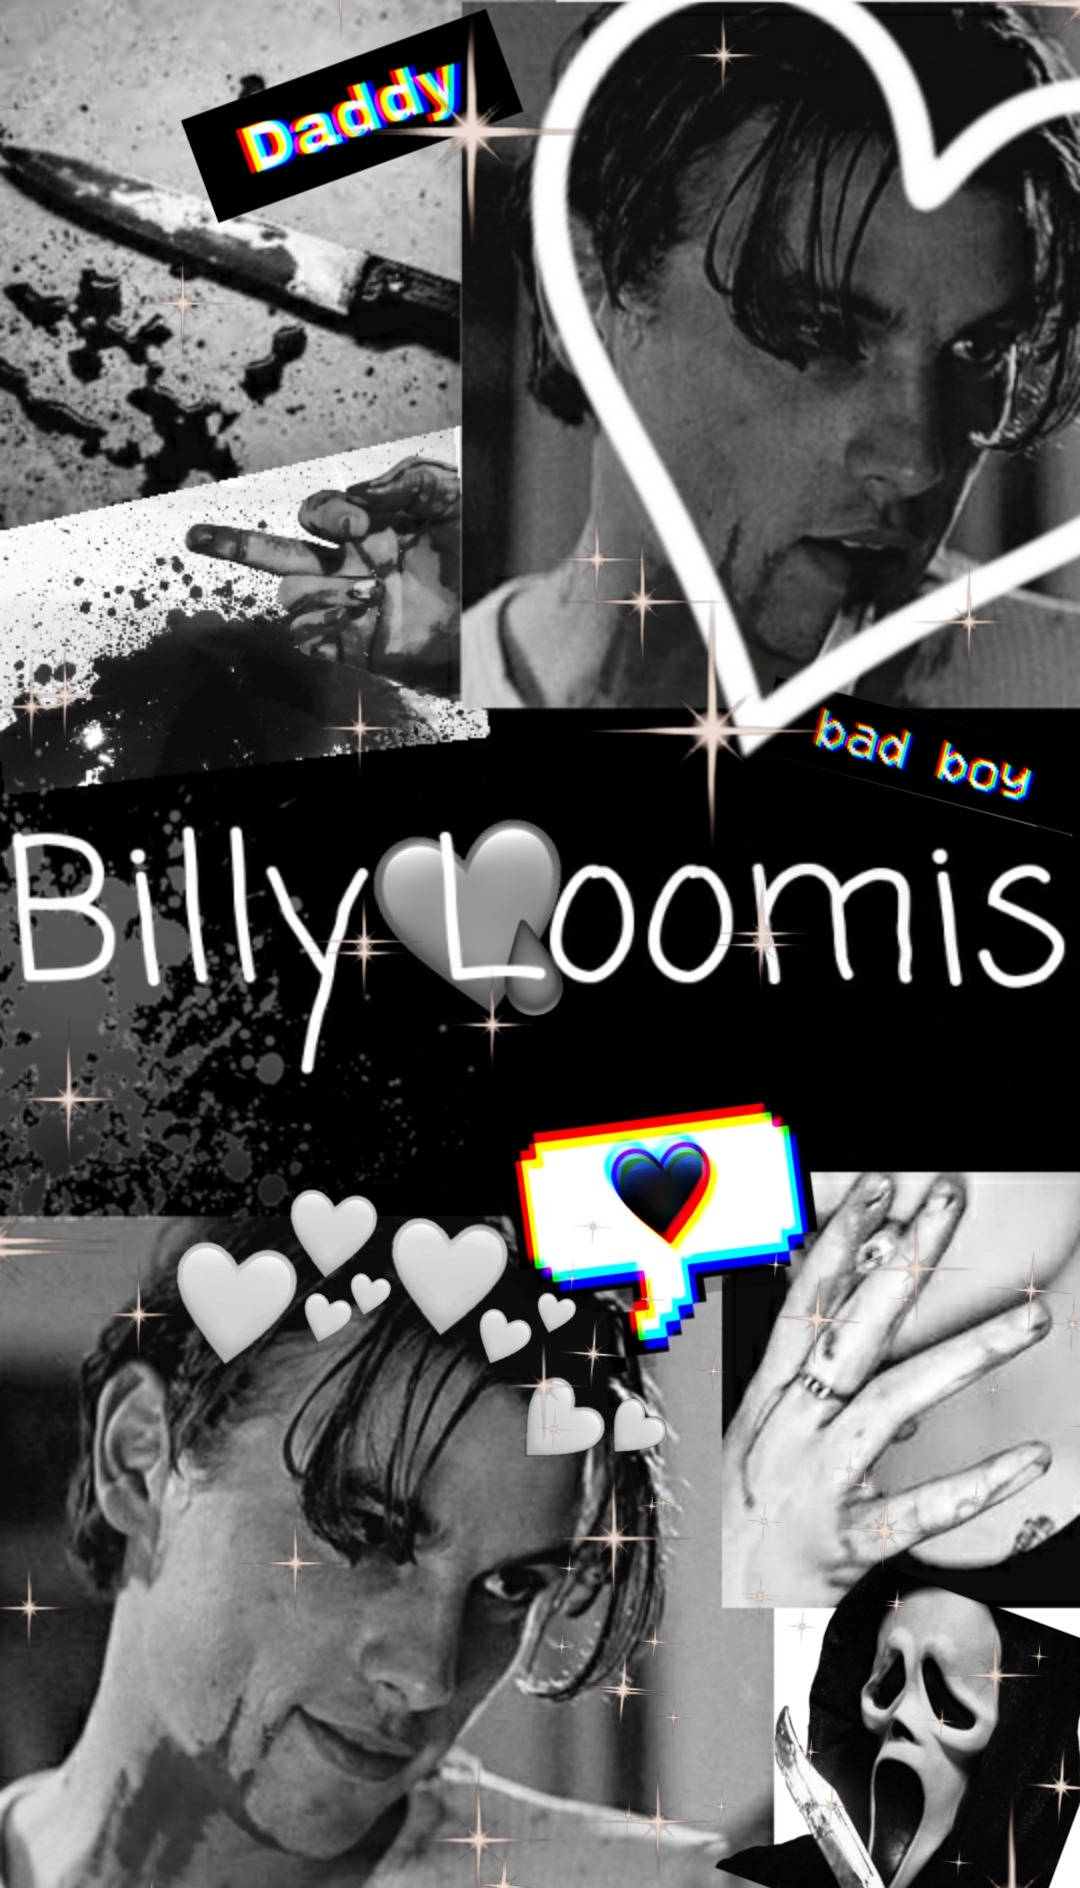 Monochrome Poster Of Billy Loomis Background